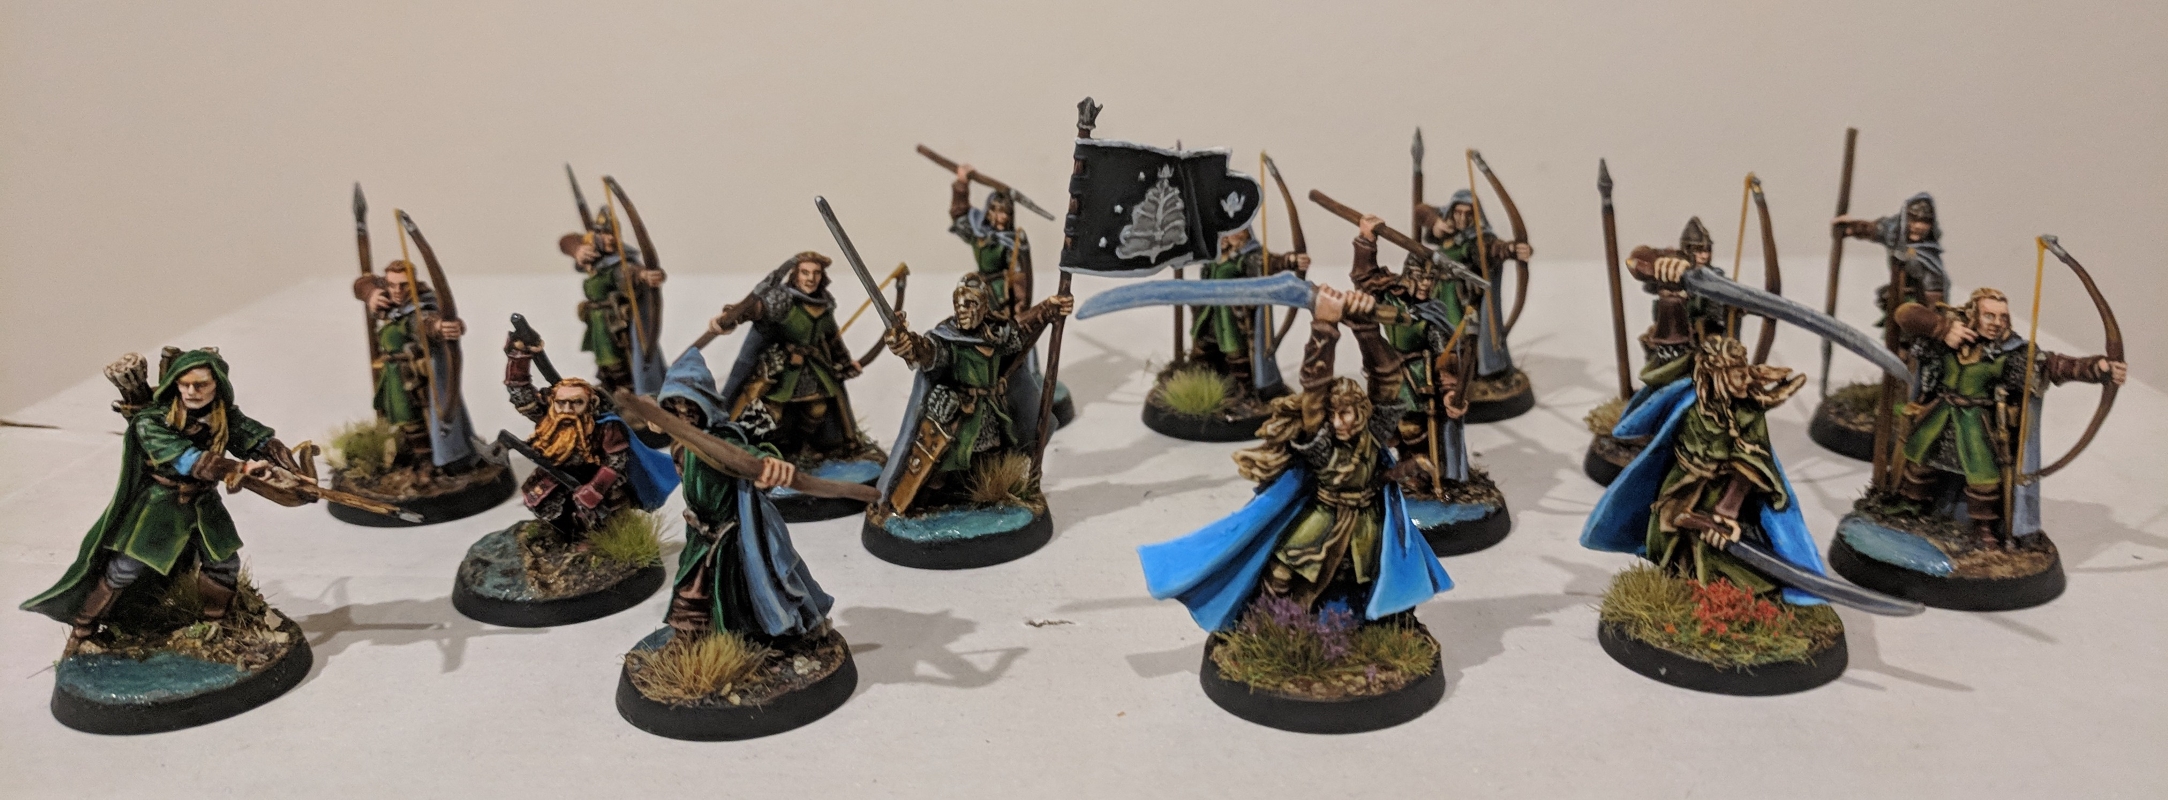 Rangers of the North,Grey Company,GW LOTR miniatures OOP New